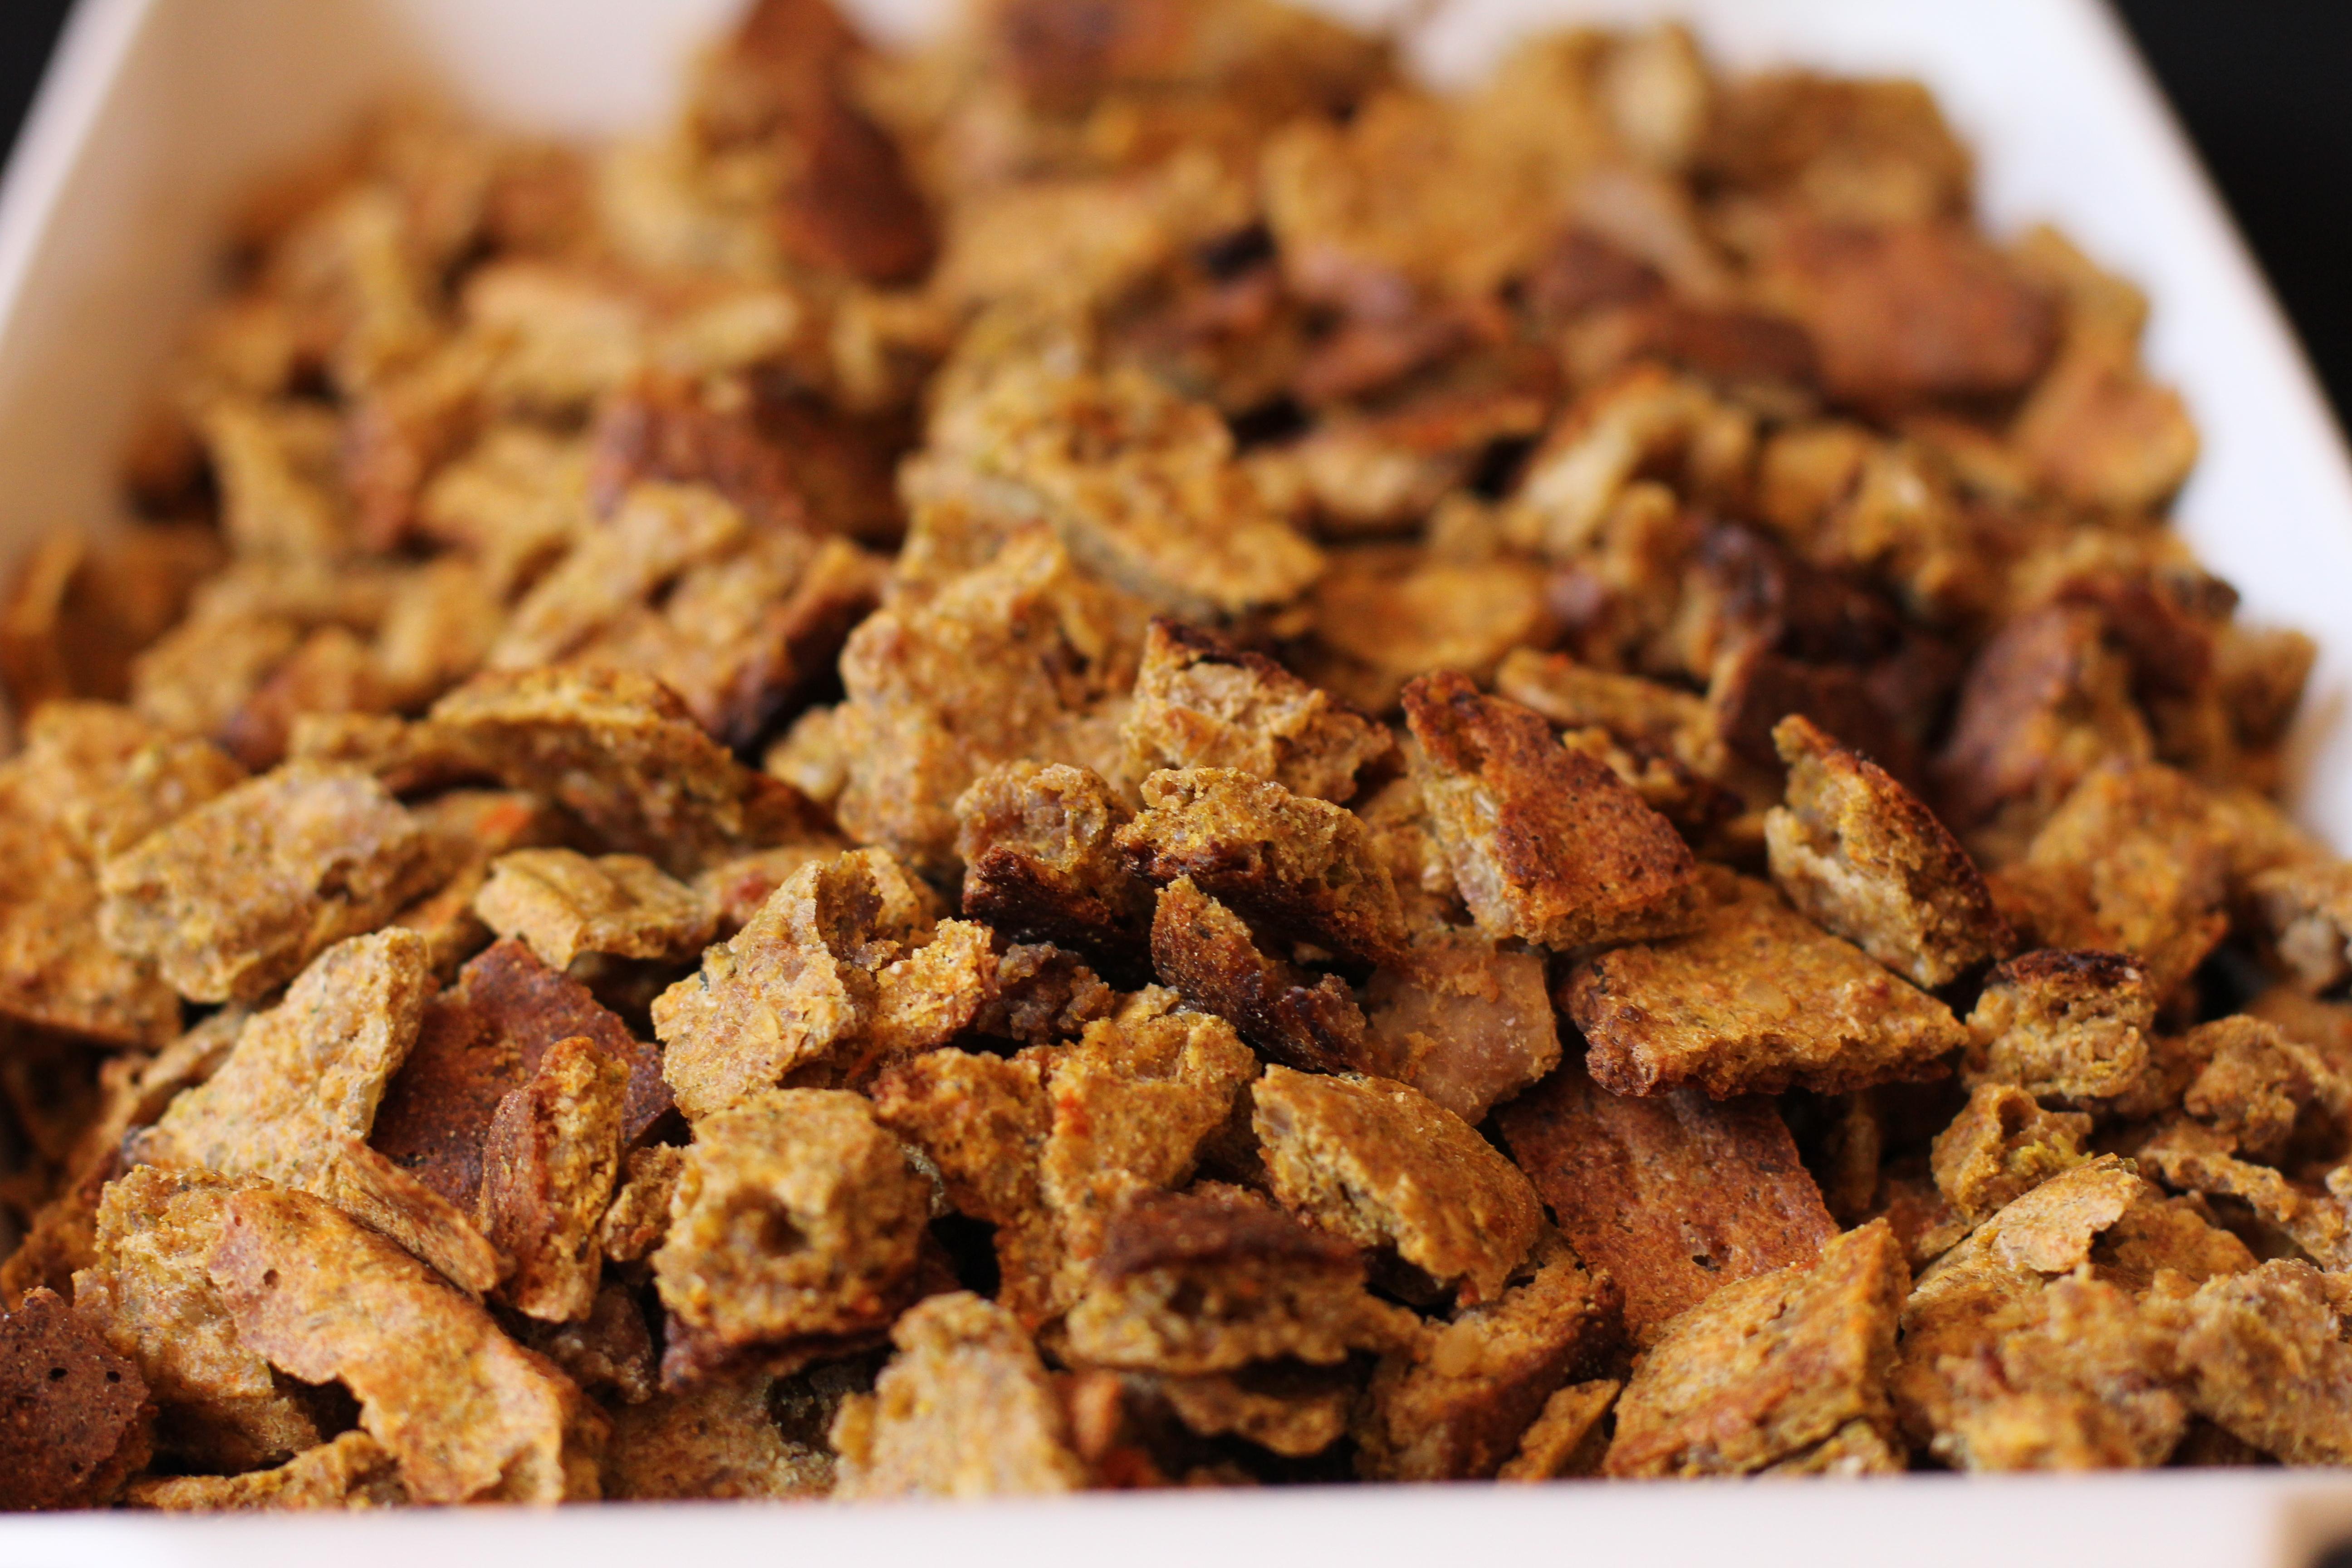 How to Make Healthy and Tasty Dry Dog Food
